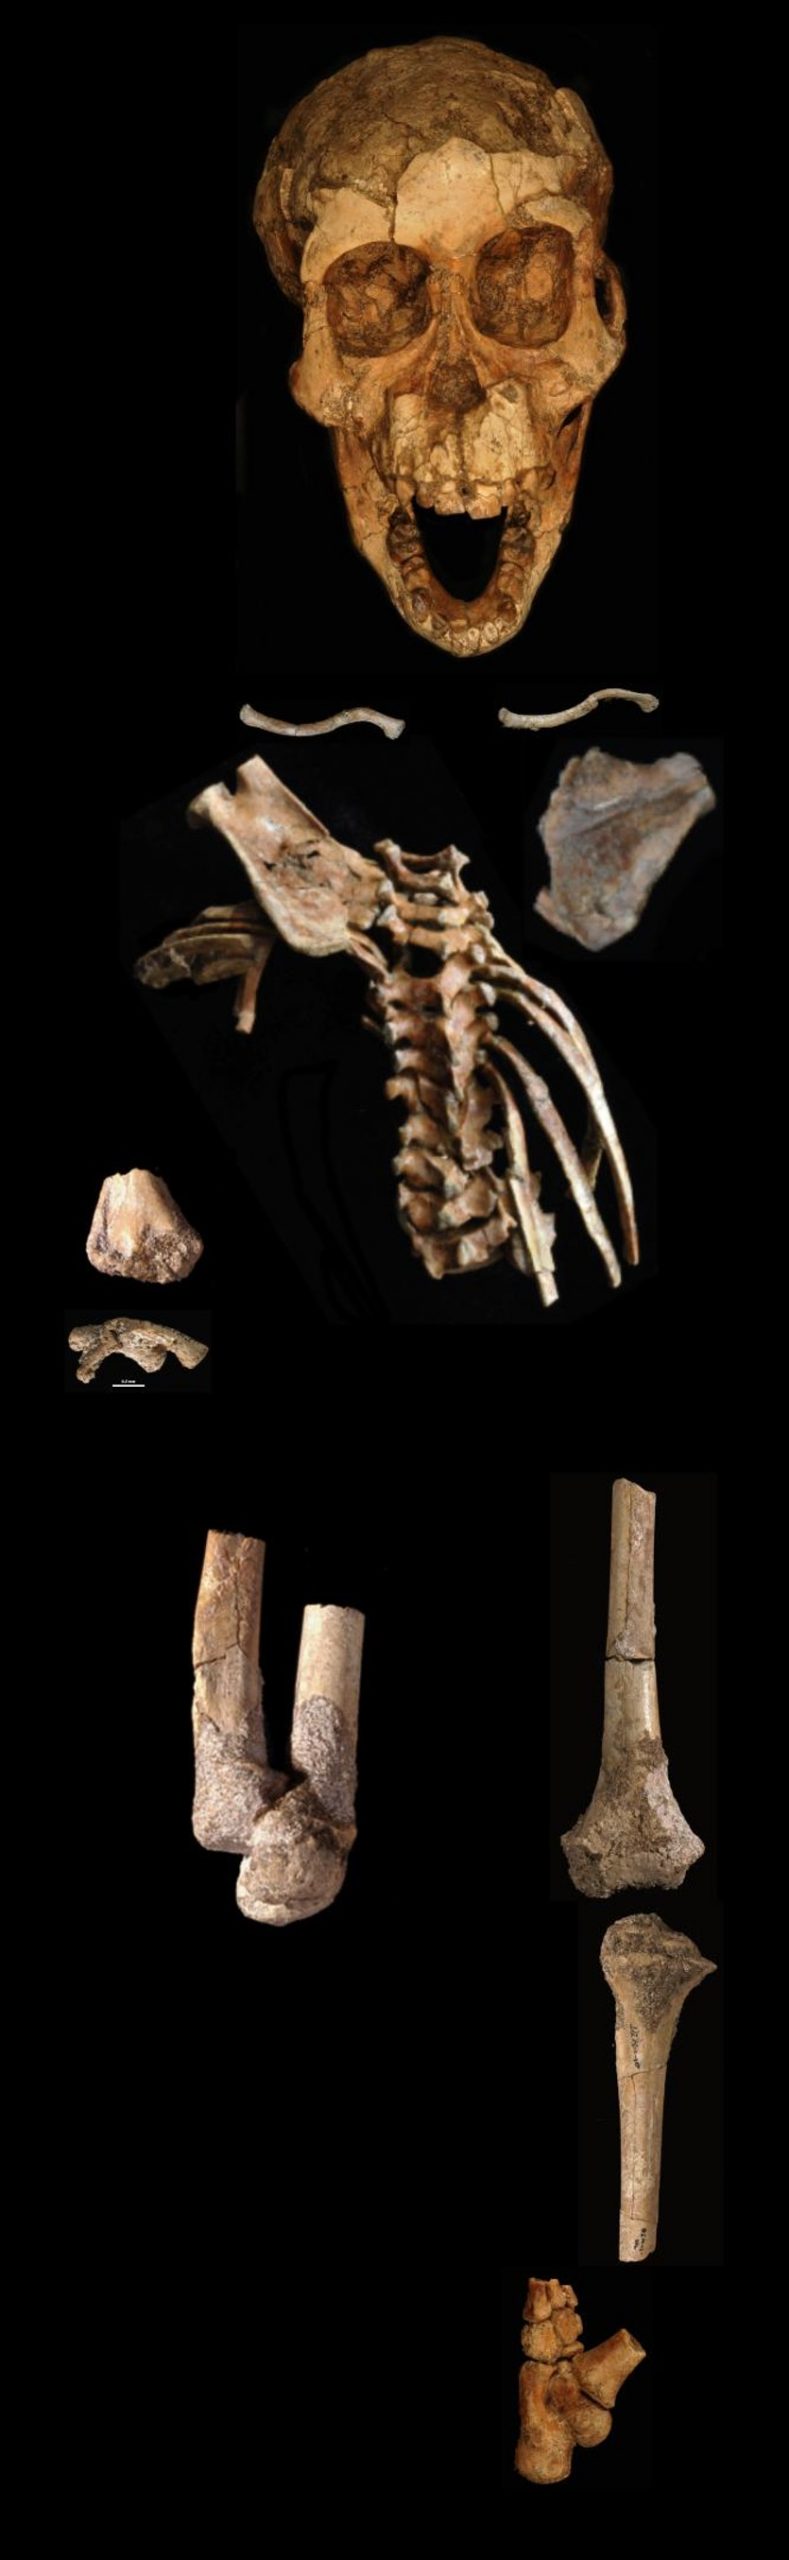 The dikika foot is one part of a partial skeleton of a 3. 32 million-year-old skeleton of an australopithecus afarensis child.